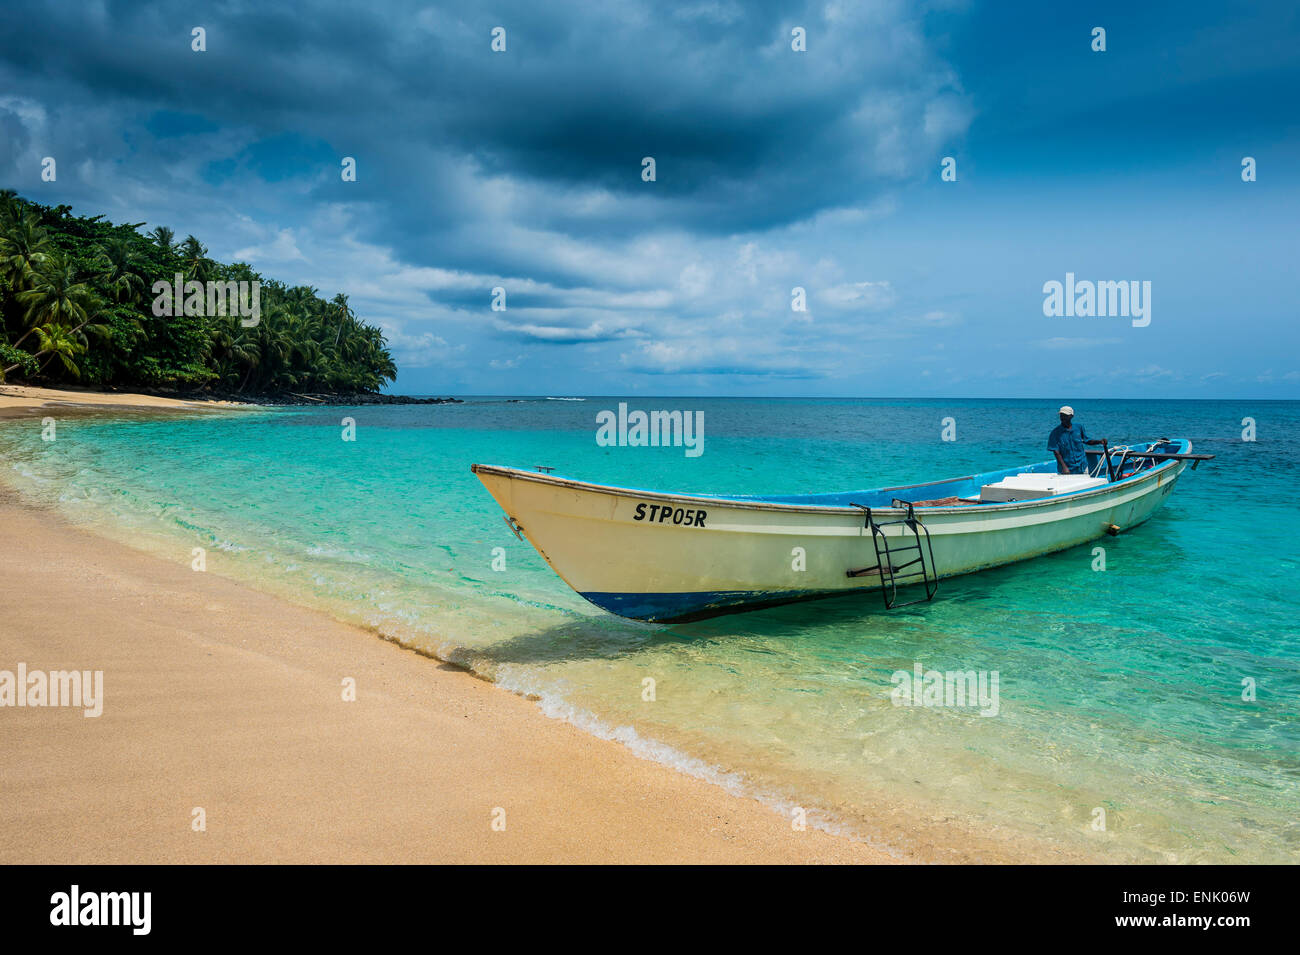 Little motorboat in the turquoise waters of Banana beach, UNESCO Biosphere Reserve, Principe, Sao Tome and Principe Stock Photo